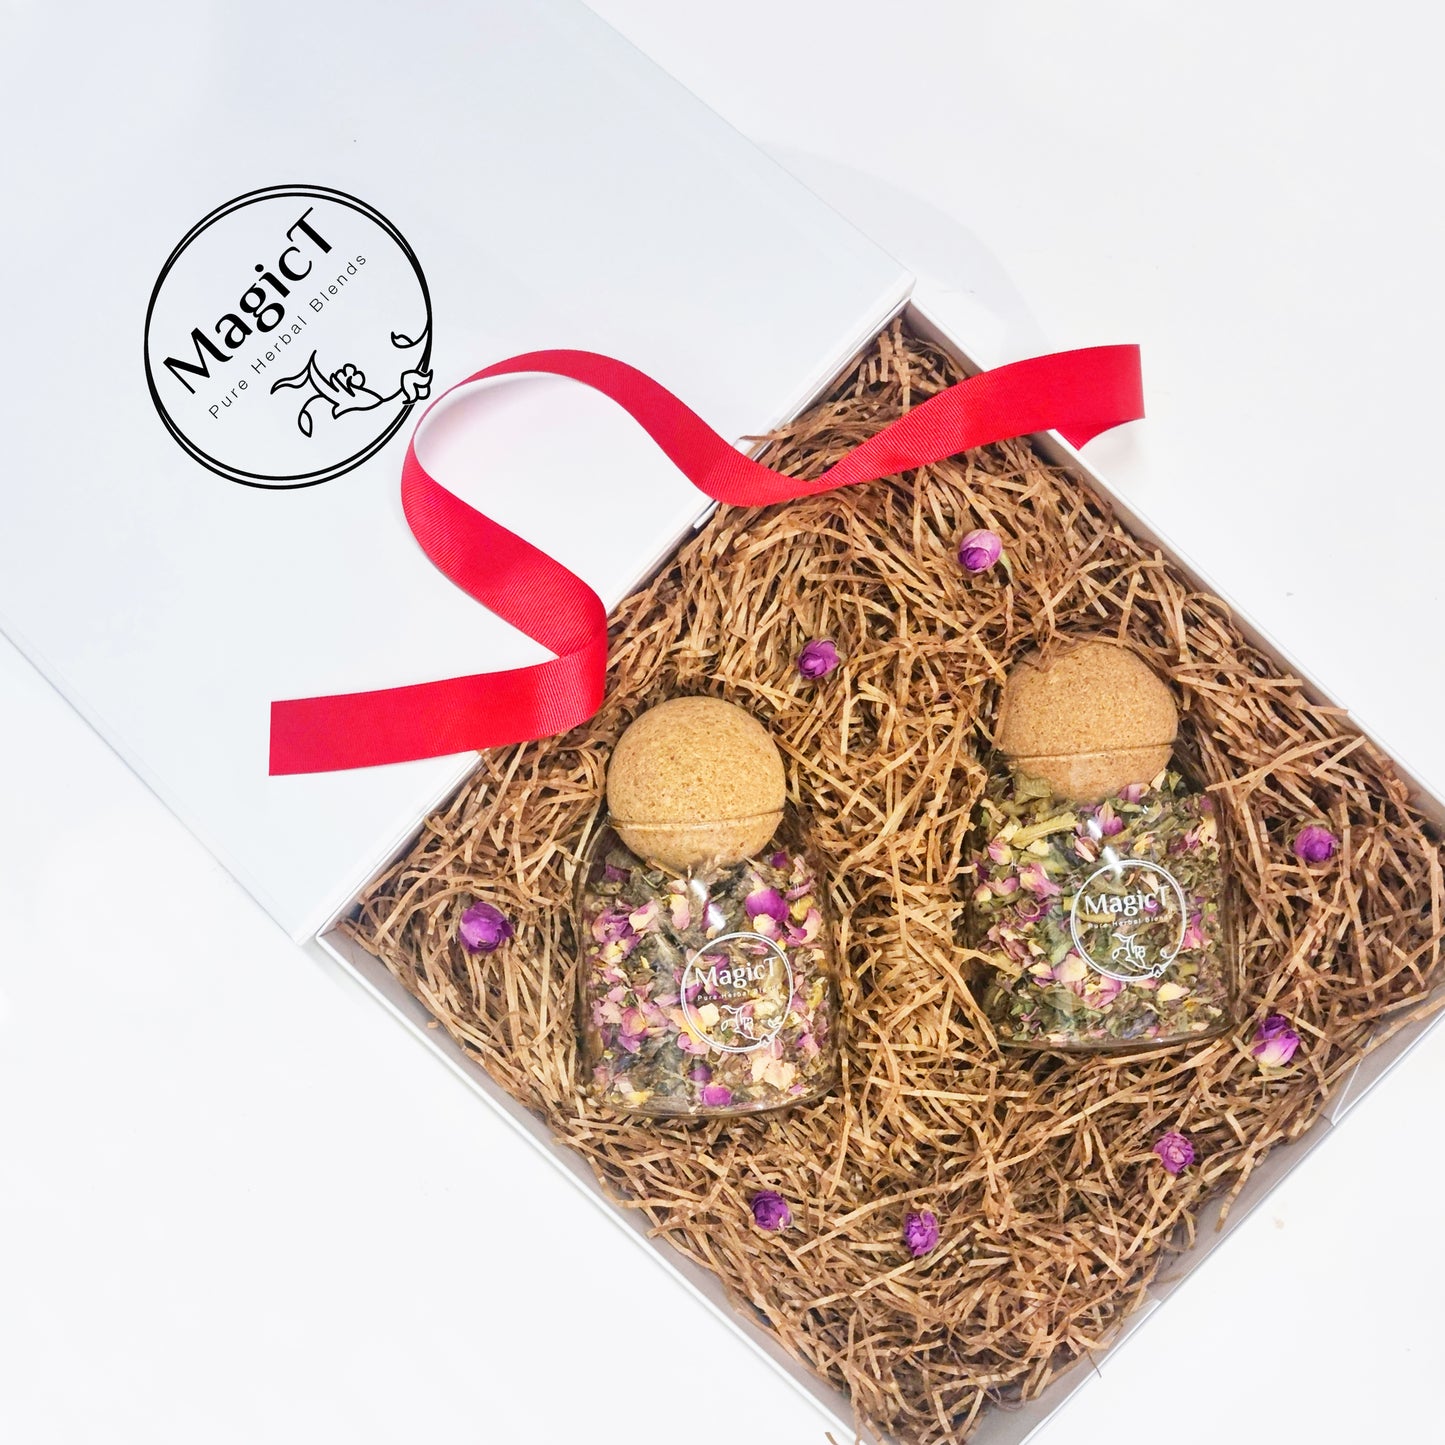 MagicT Gift Box: Share the Joy of Herbal Teas with a Customizable Gift Set